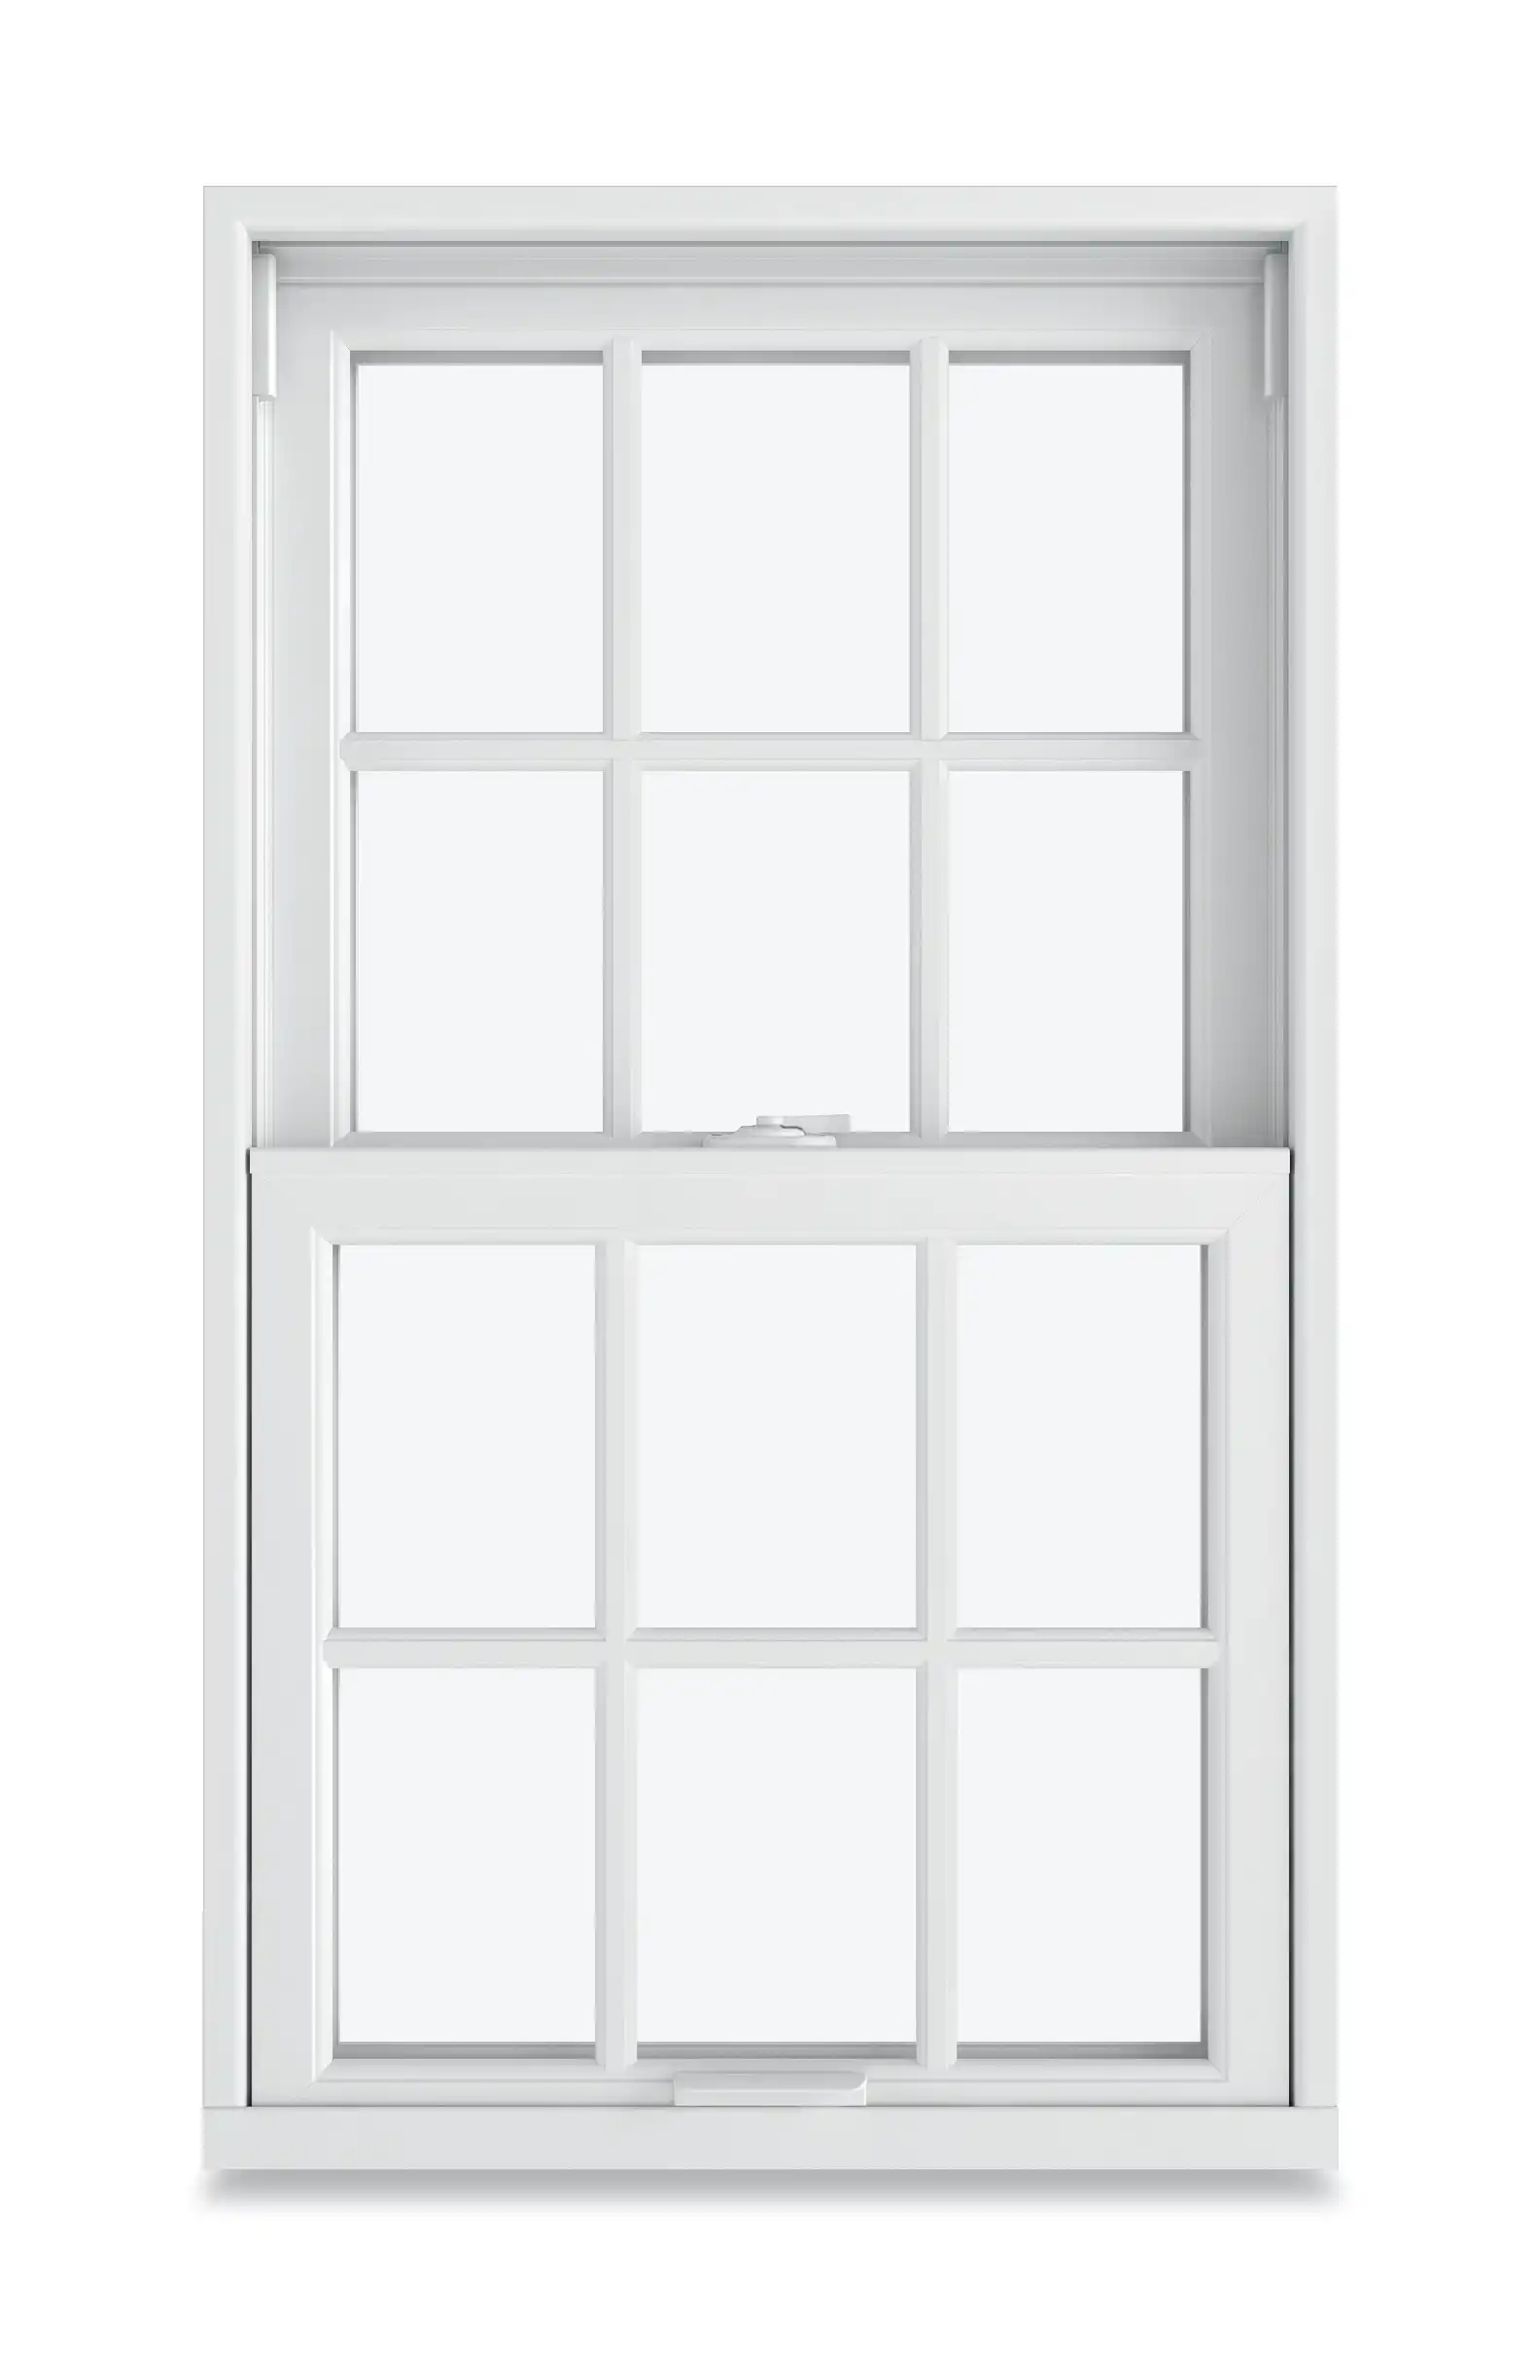 Image of a white Marvin Replacement Double Hung window with standard divided lite style.